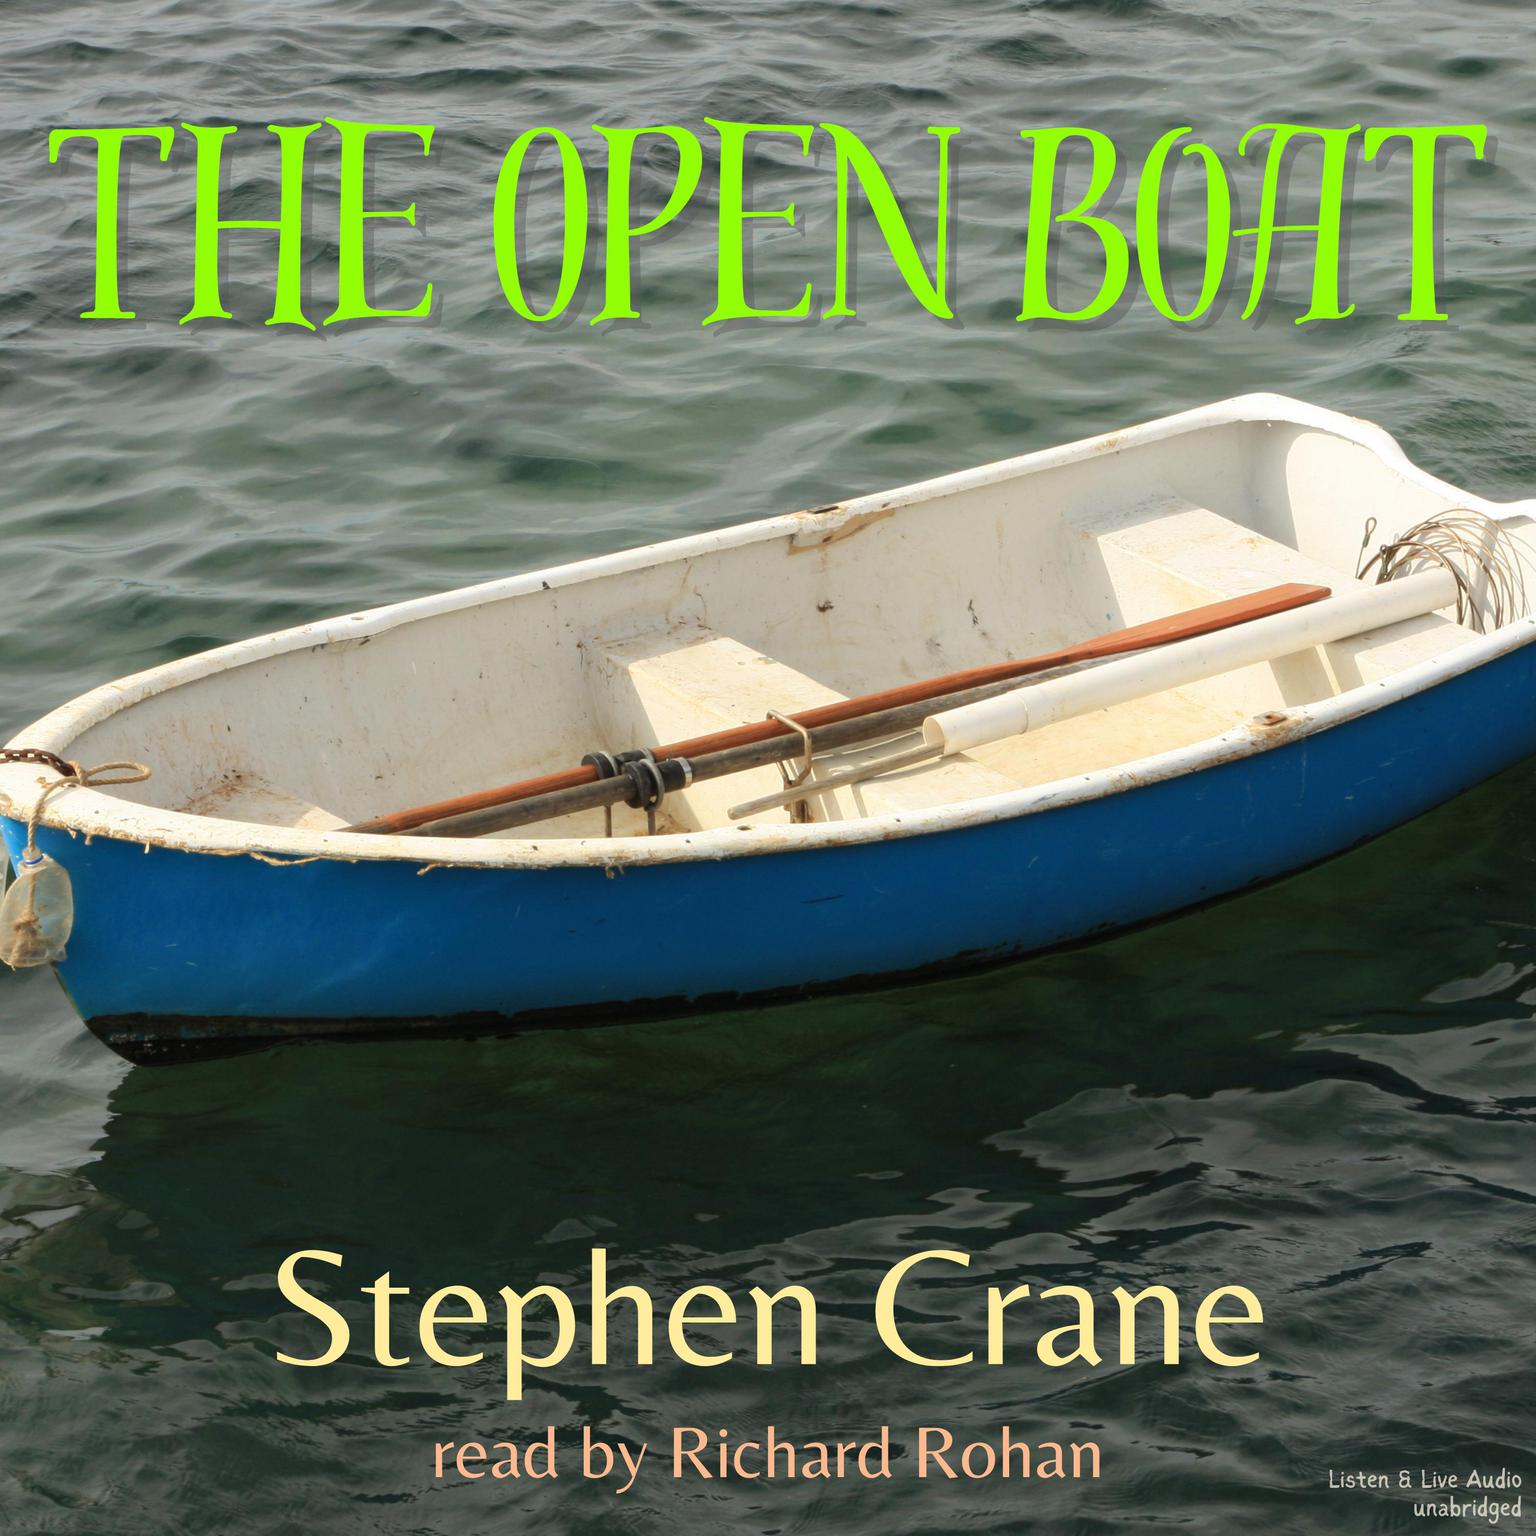 The Open Boat Audiobook, by Stephen Crane